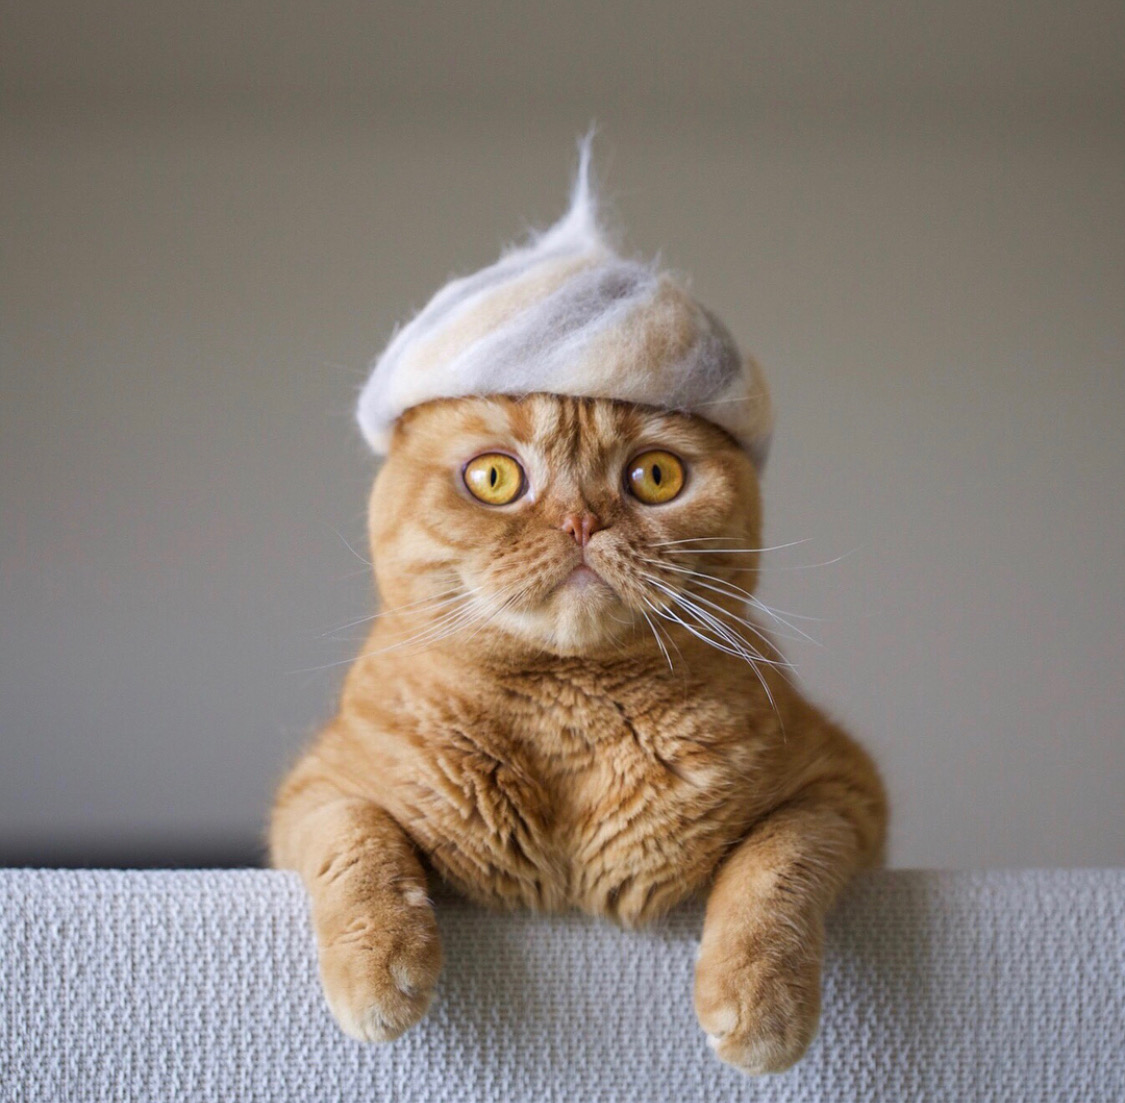 reparere fortvivlelse foretage Nukege Hats: Hats for Cats, Fashioned Out of Their Own Shed | Spoon & Tamago